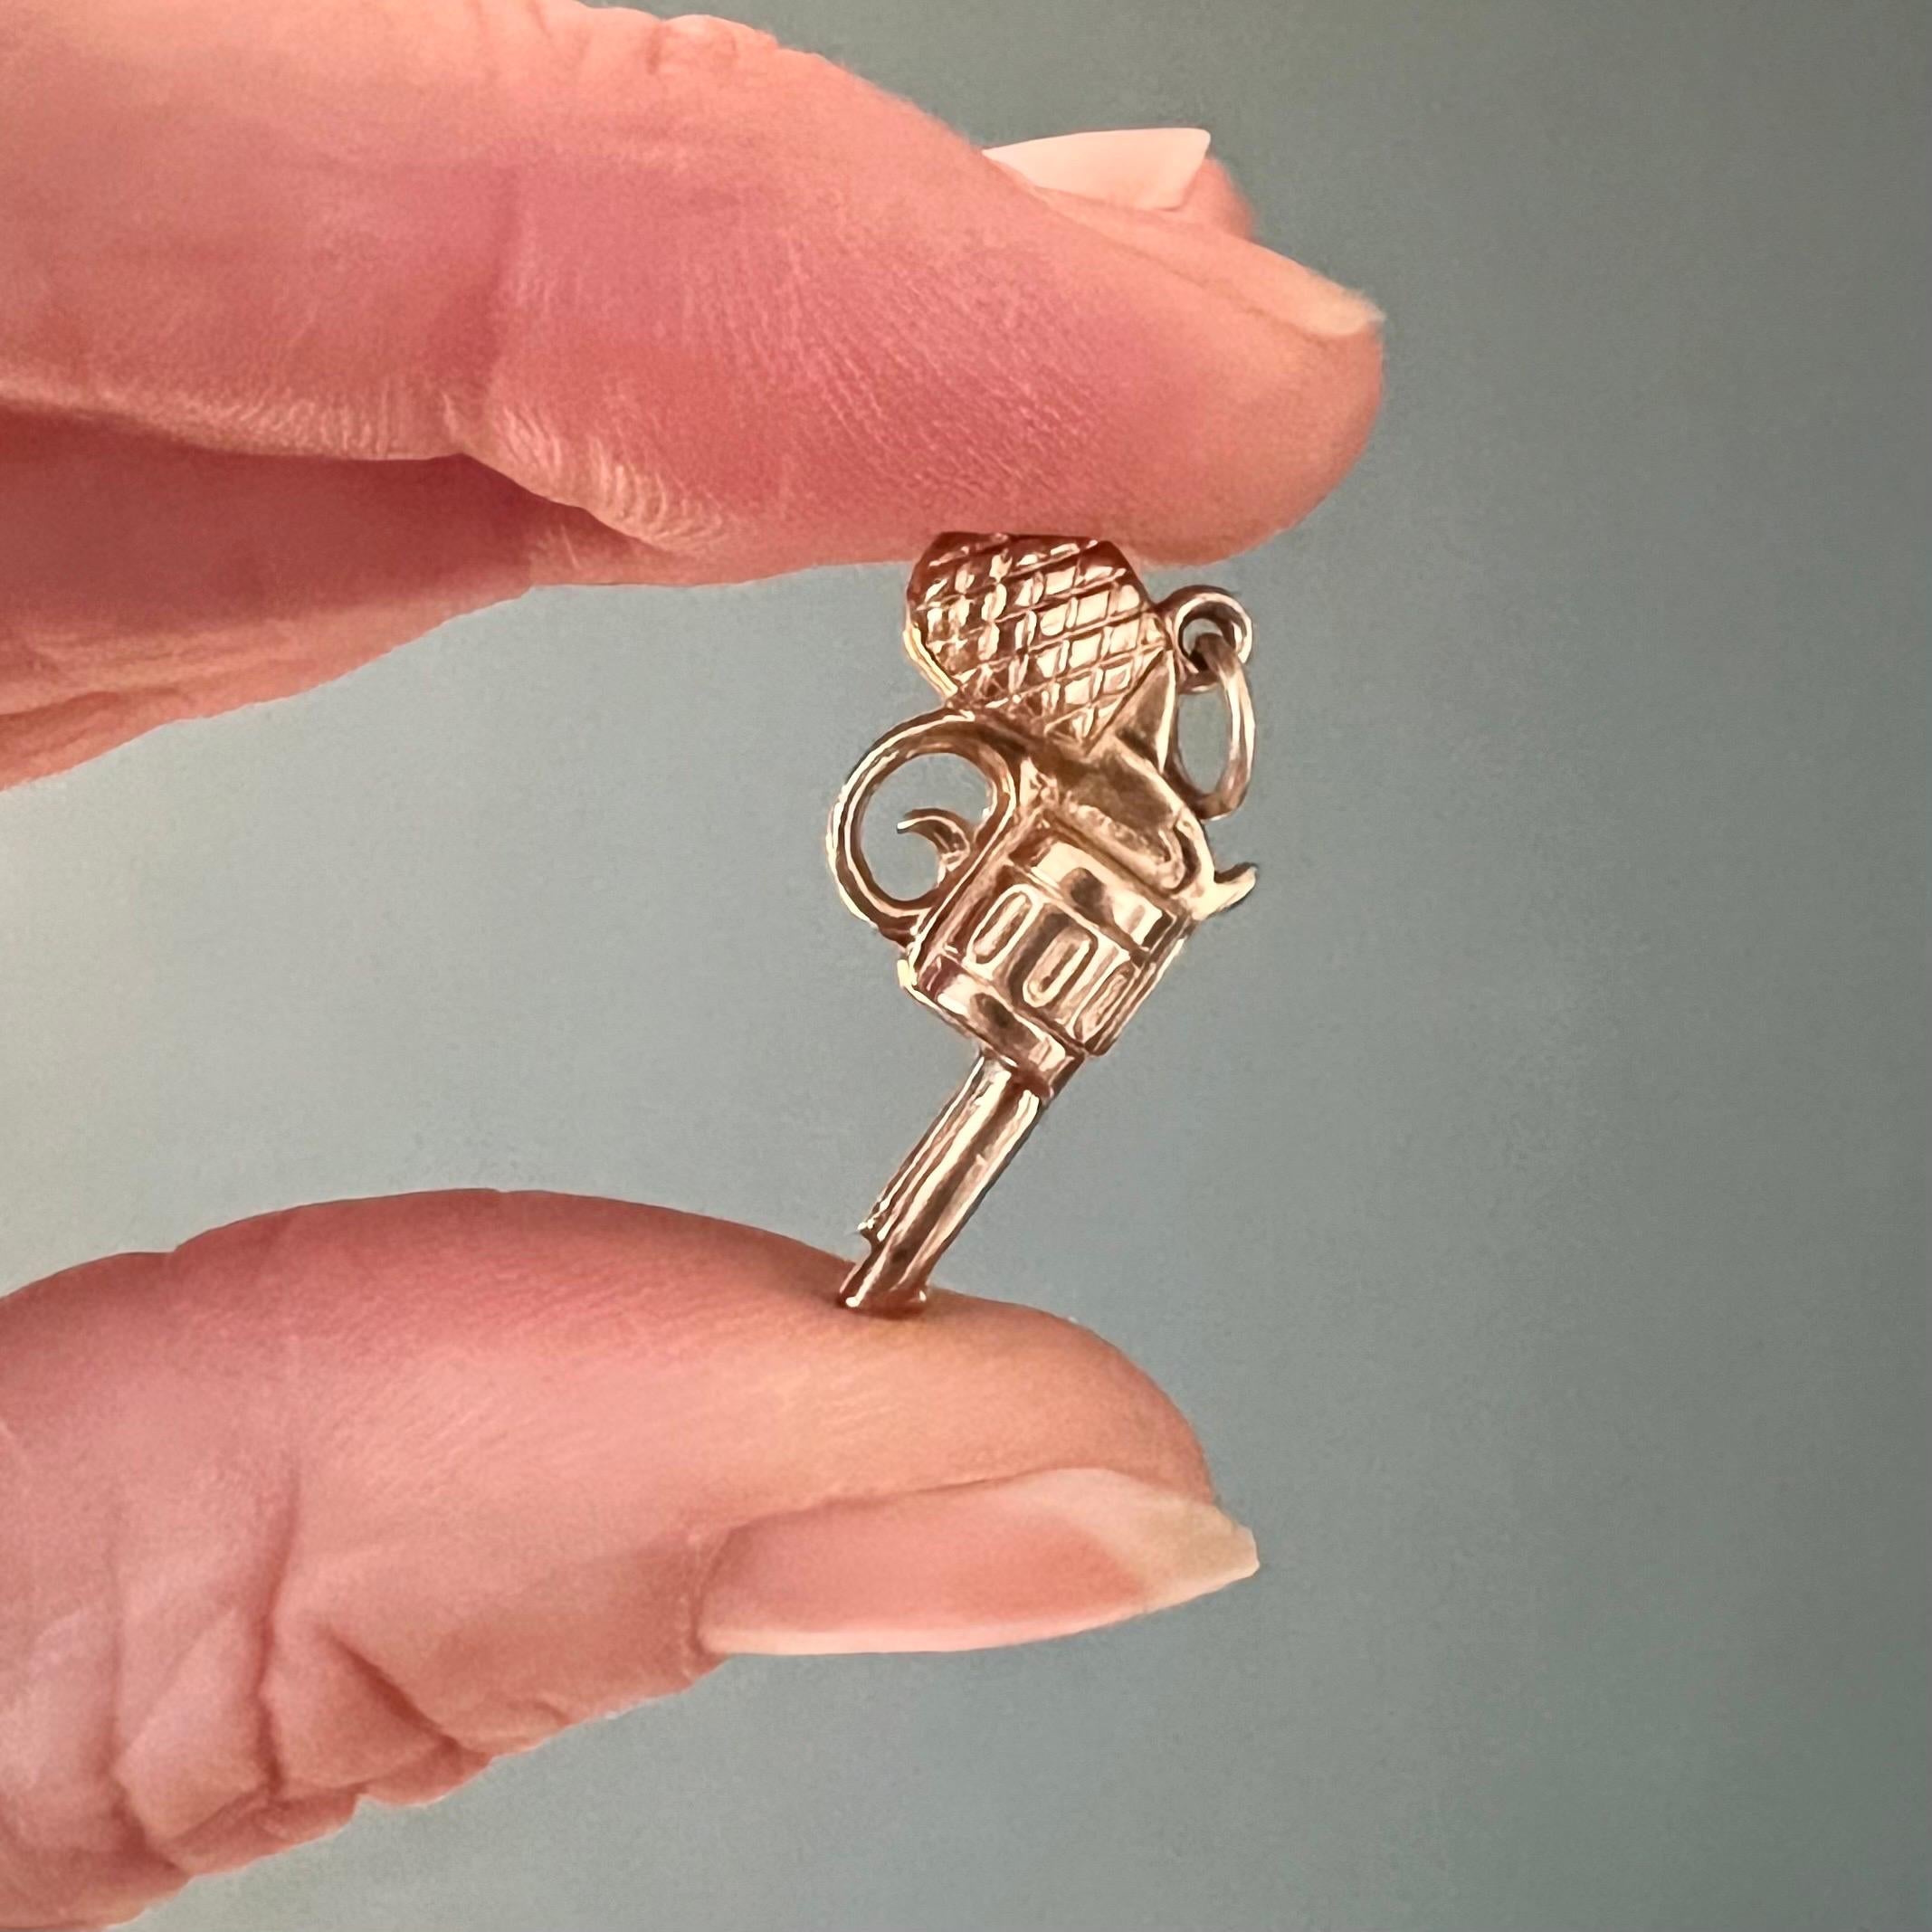 This is a vintage 9 karat yellow gold revolver gun charm pendant. The handgun is detailed with one barrel and one revolving cylinder with multiple chambers - each holding a single cartridge for firing. The grip panel has nice diamond-shaped